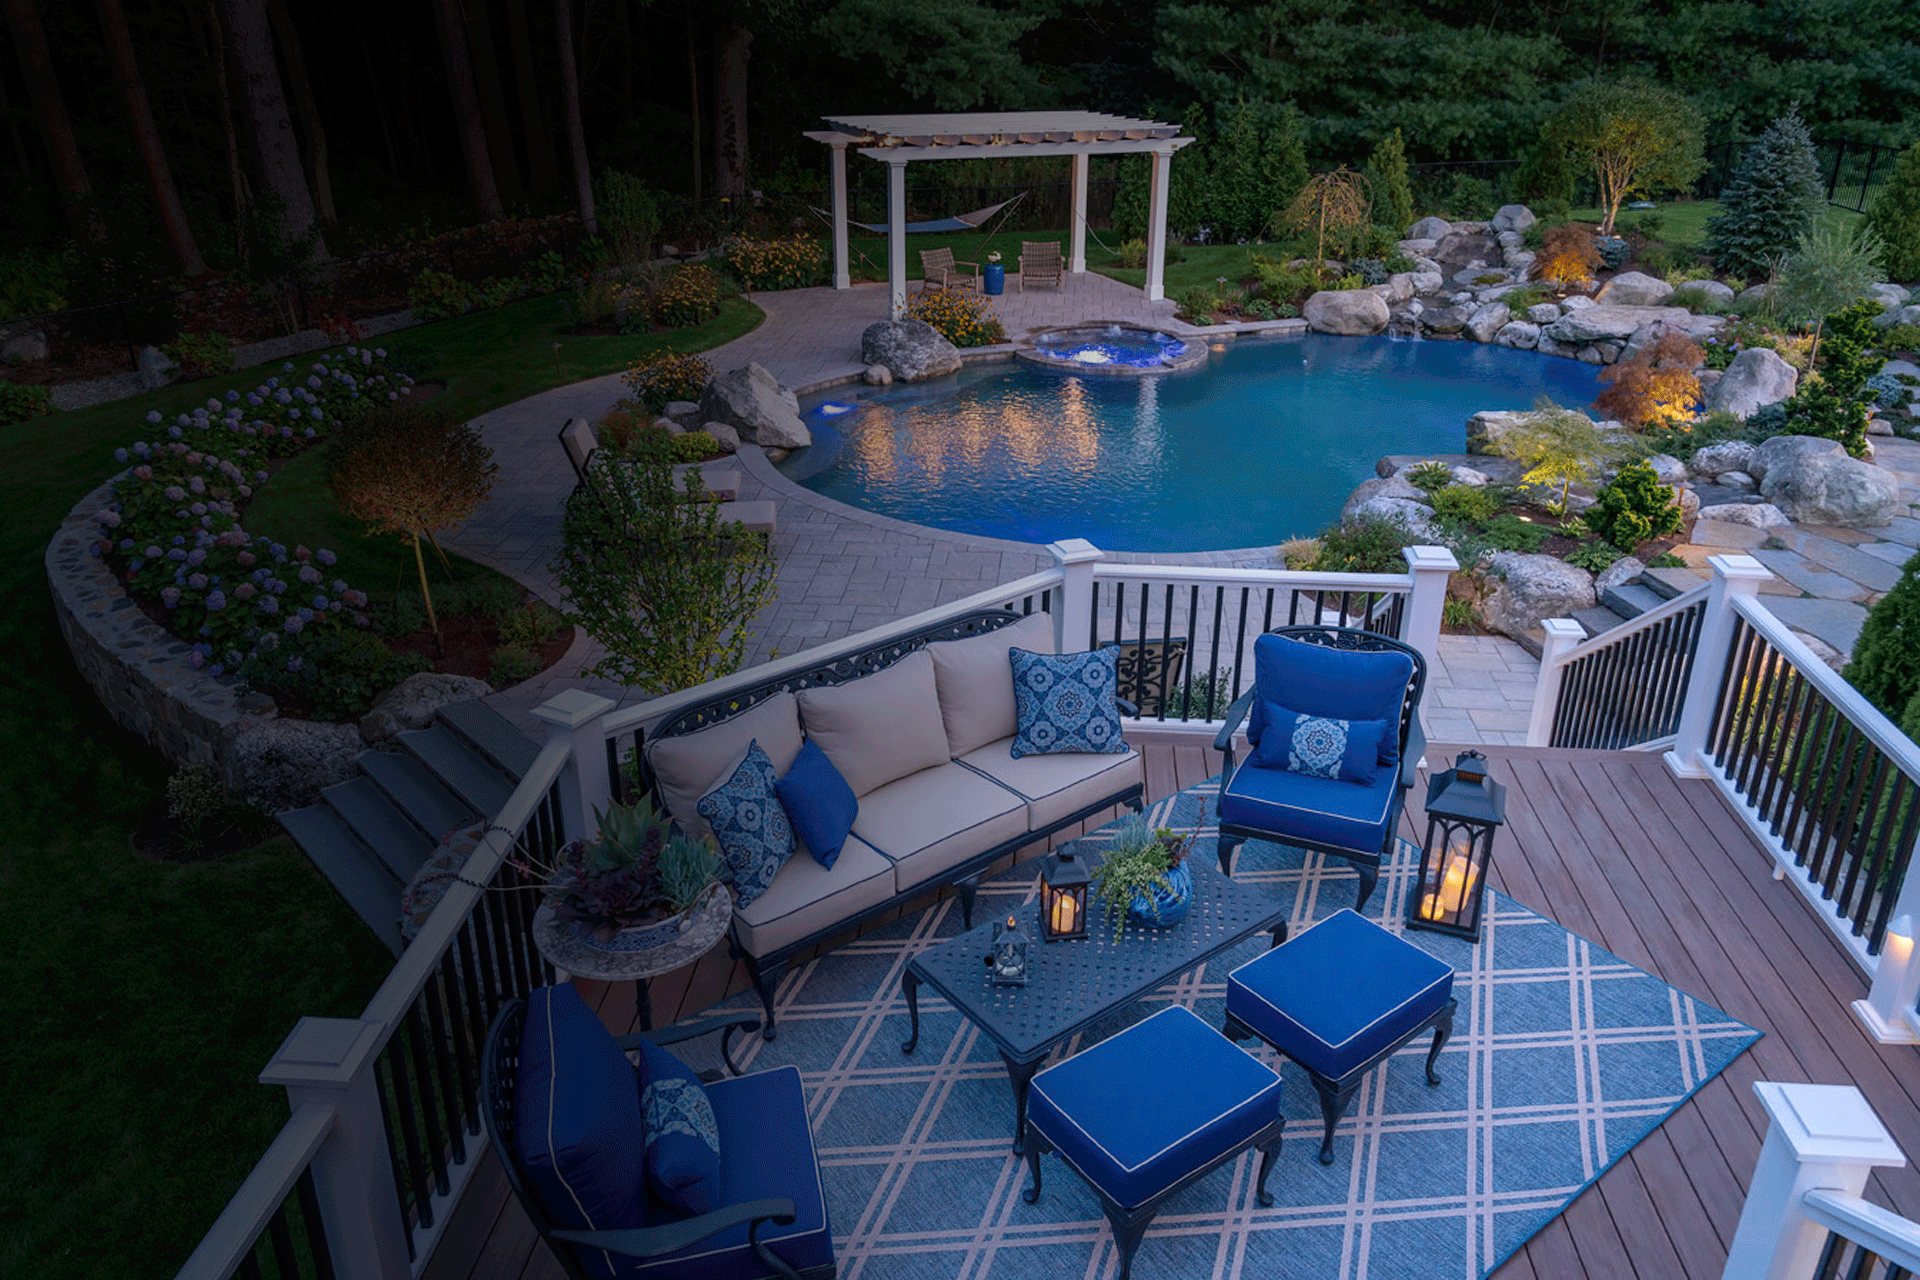 An elegantly furnished outdoor deck overlooking a beautiful swimming pool with blue cushions, flowers, rocks, and a pergola at dusk.